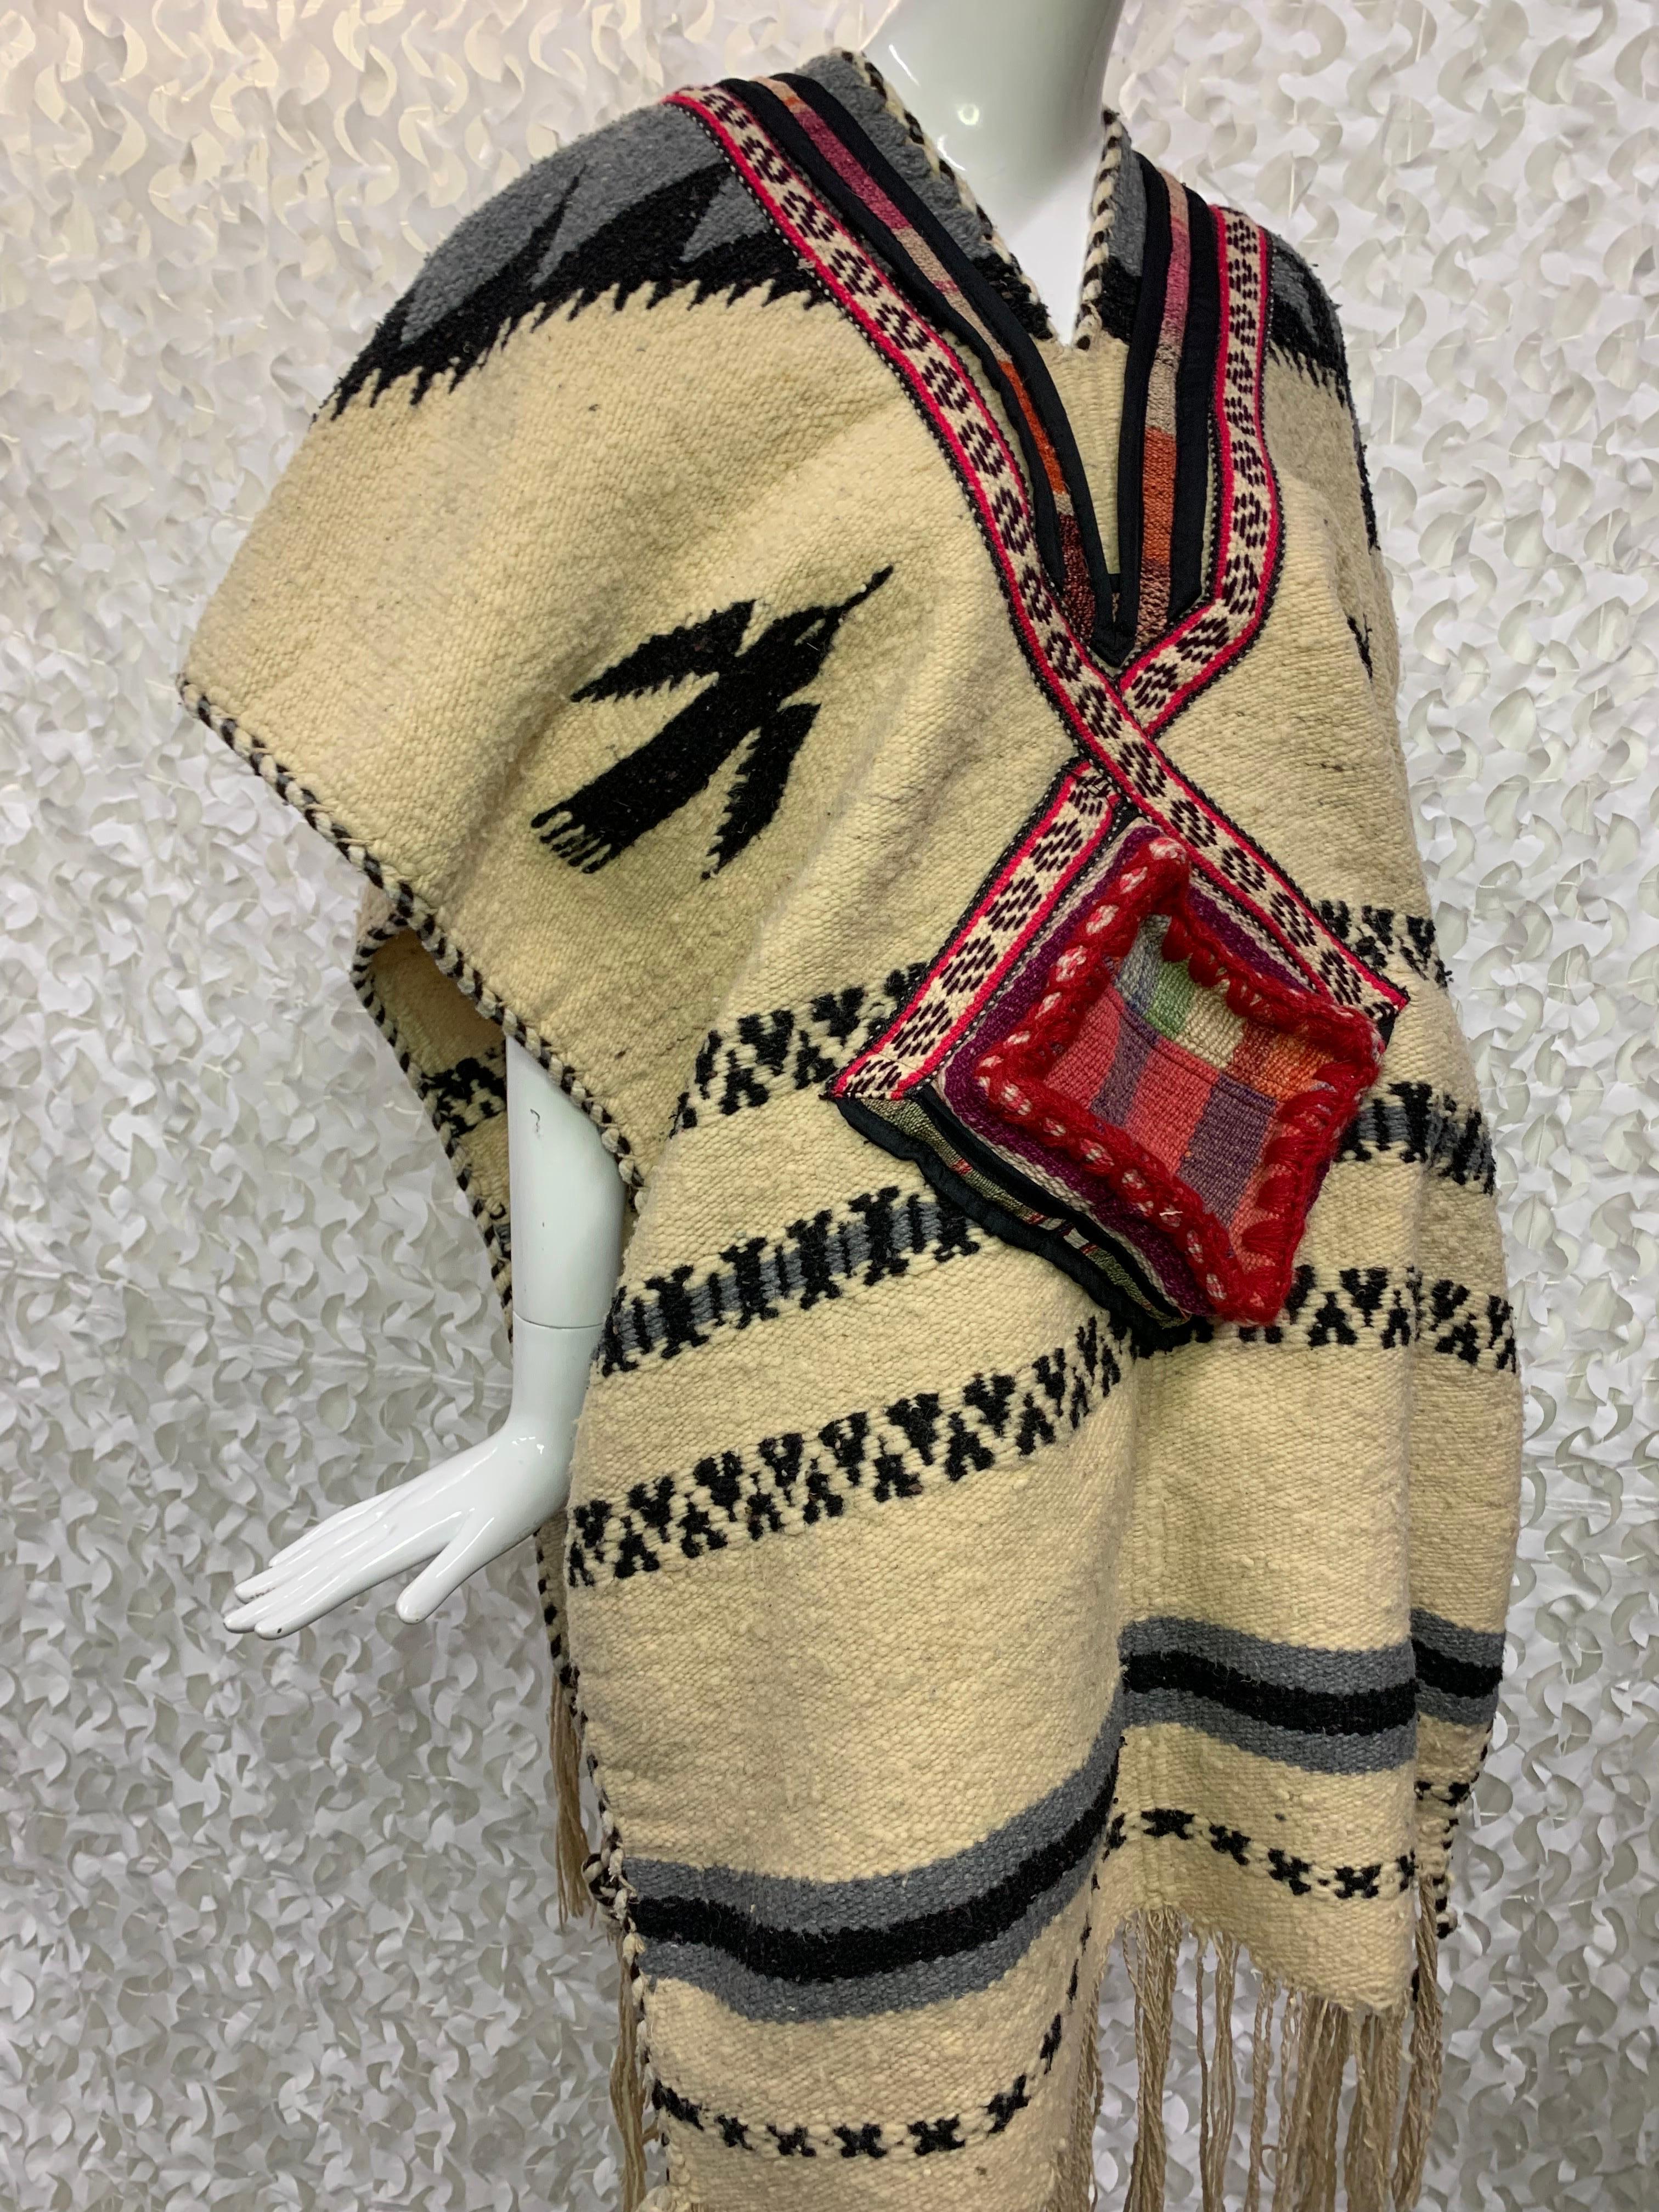 Torso Creations Hand-Woven Folkloric Poncho w Colorfully Woven Pouch Pockets In Excellent Condition For Sale In Gresham, OR